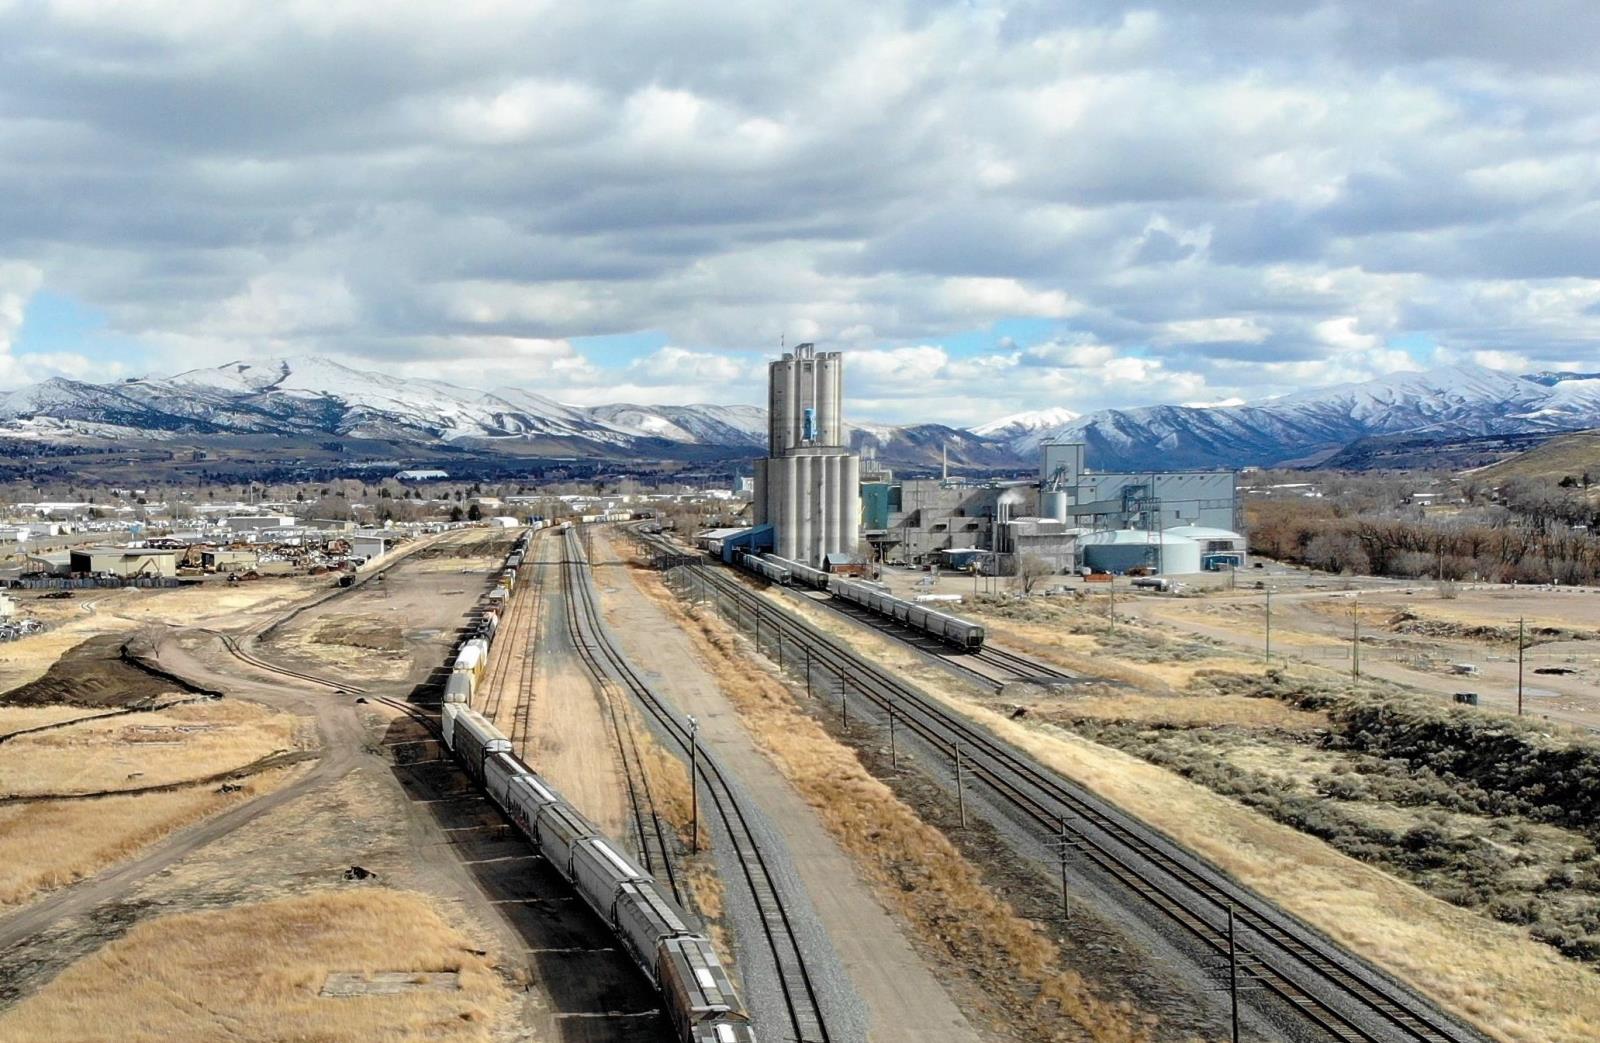 This is the site where an intermodal rail terminal will be built in Pocatello by Savage, a global supply chain company. It will be Idaho’s first such facility, according to a news release, and will benefit Idaho farmers and other businesses by improving the economics of exporting containerized hay and other agricultural commodities. 